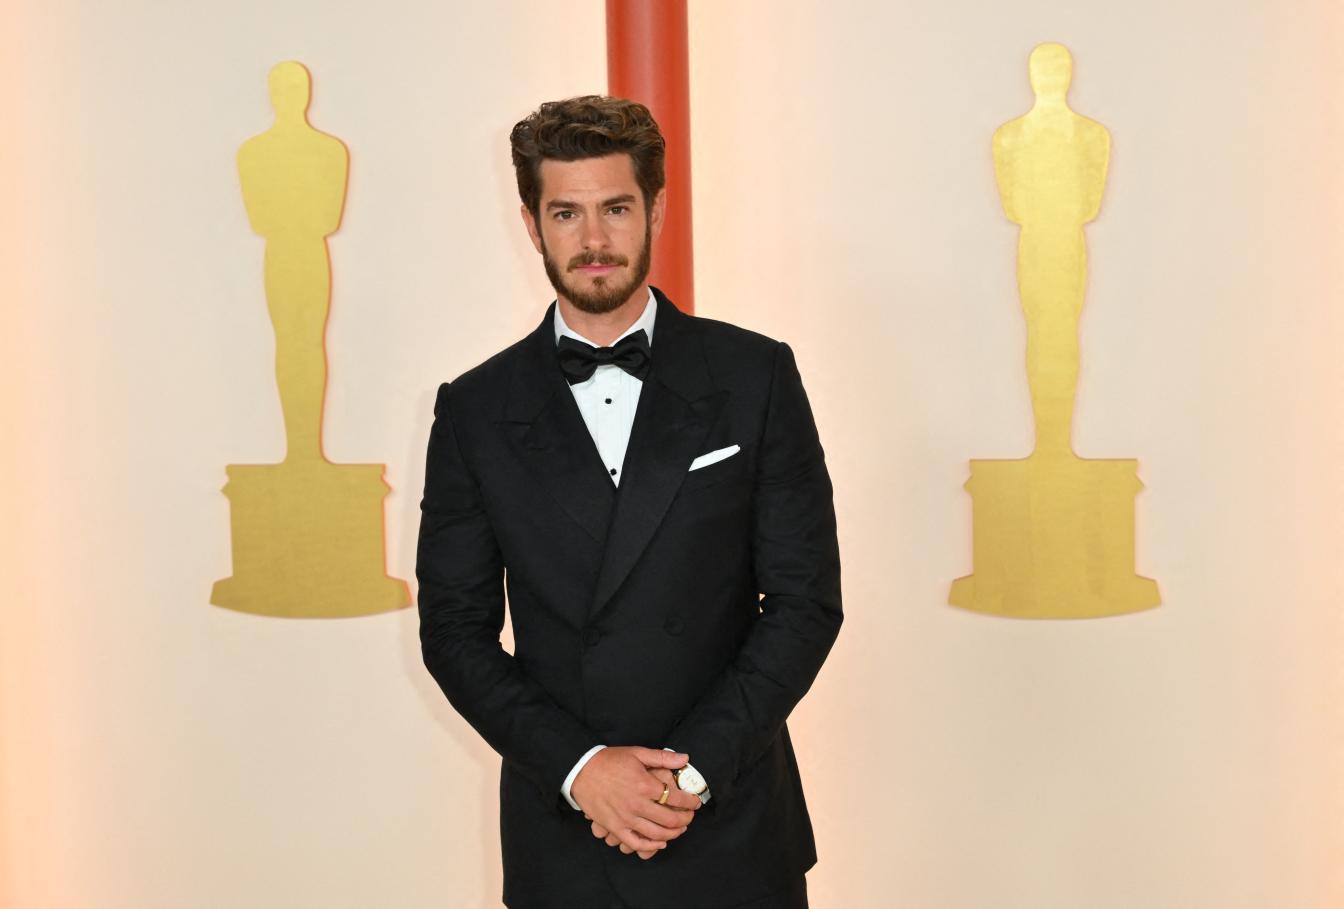 Andrew Garfield attends the 95th Annual Academy Awards at the Dolby Theatre in Hollywood